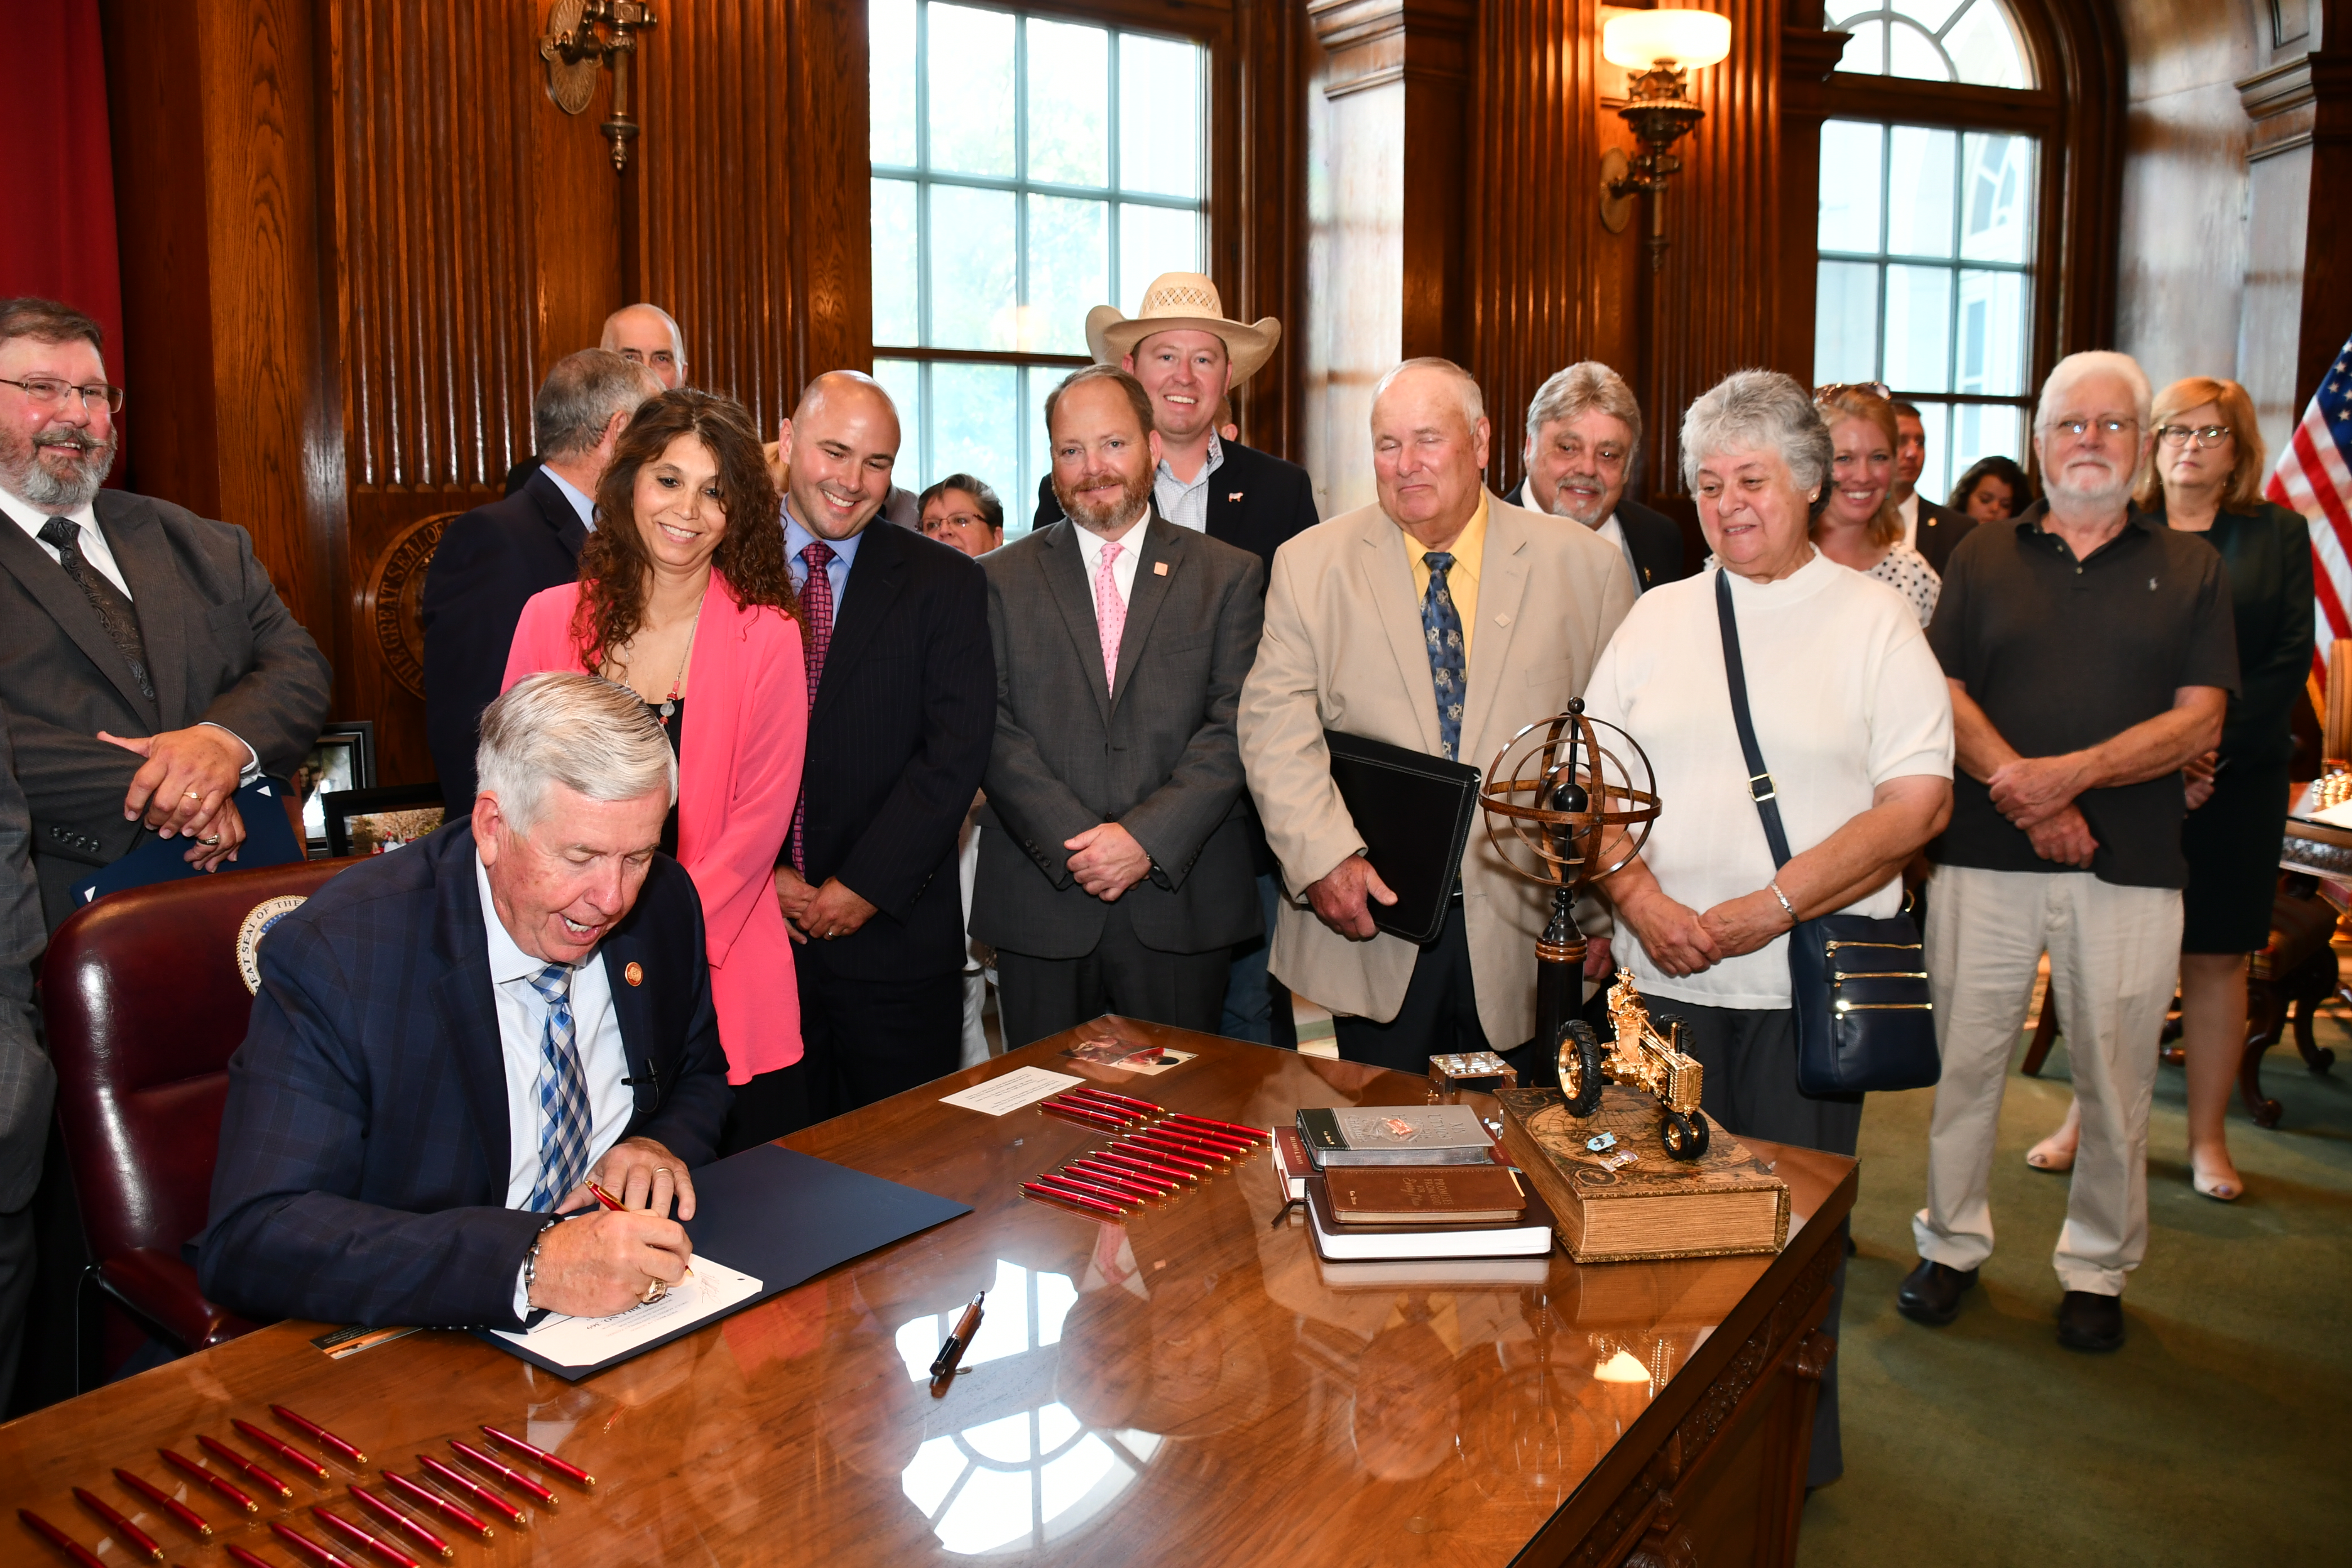 Missouri Governor Mike Parson signing House Bill 369 into law in front of a crowd.